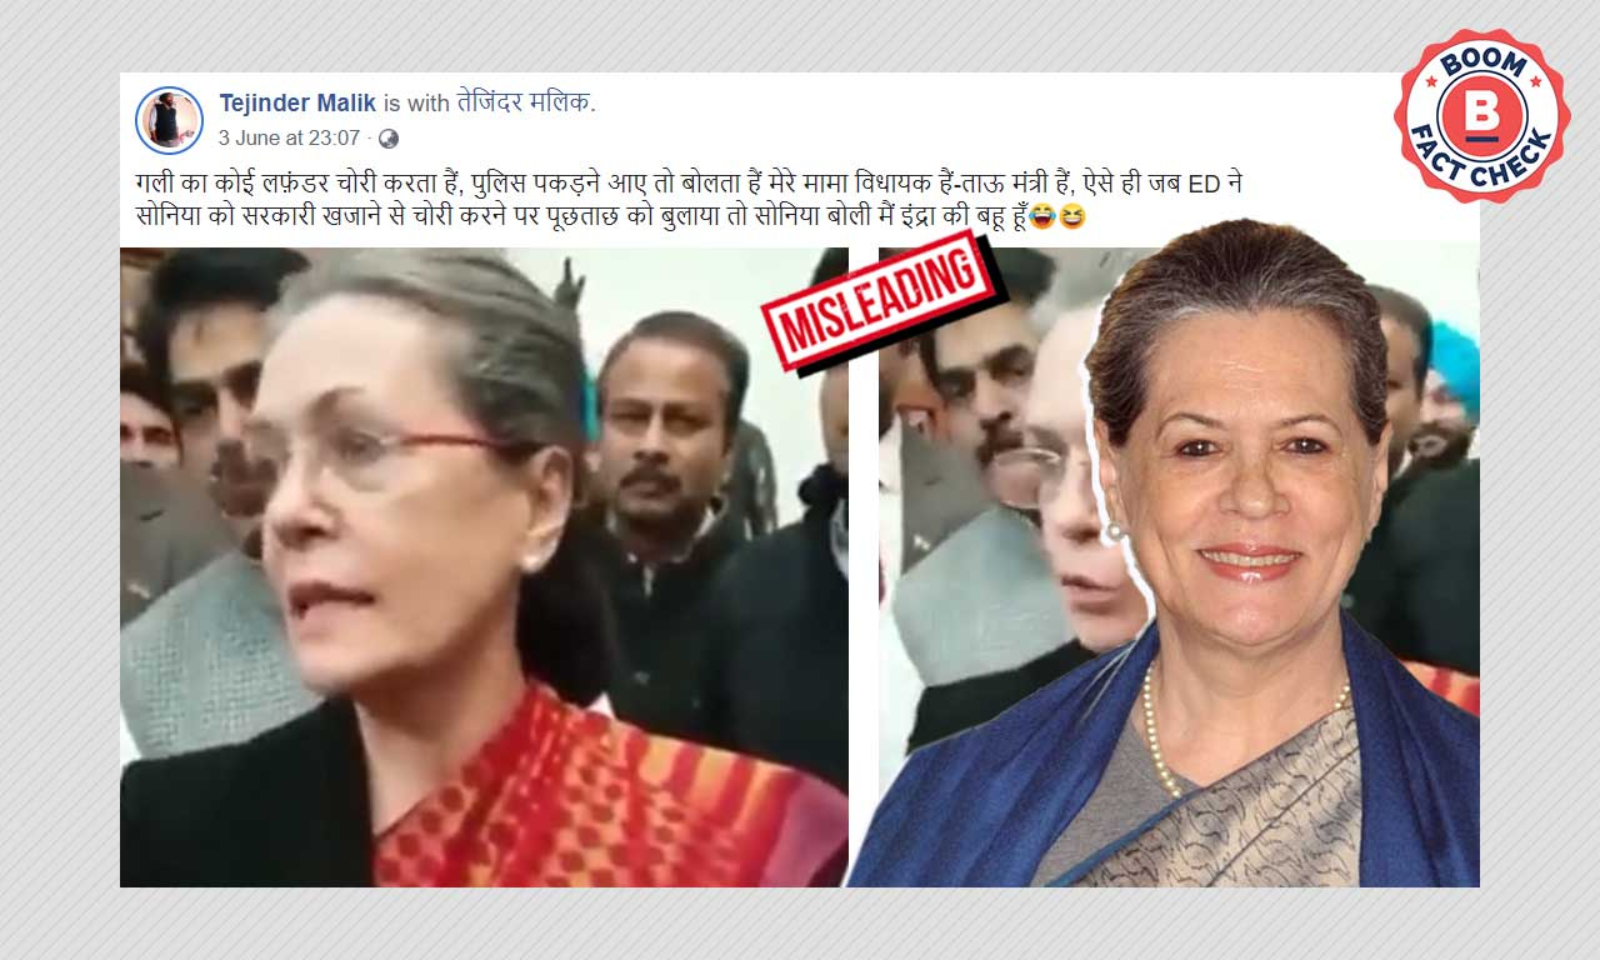 Sonia Gandhi Xxx Video - 2015 Video Of Sonia Gandhi's Comment Viral As Reply To Fresh ED Summons |  BOOM